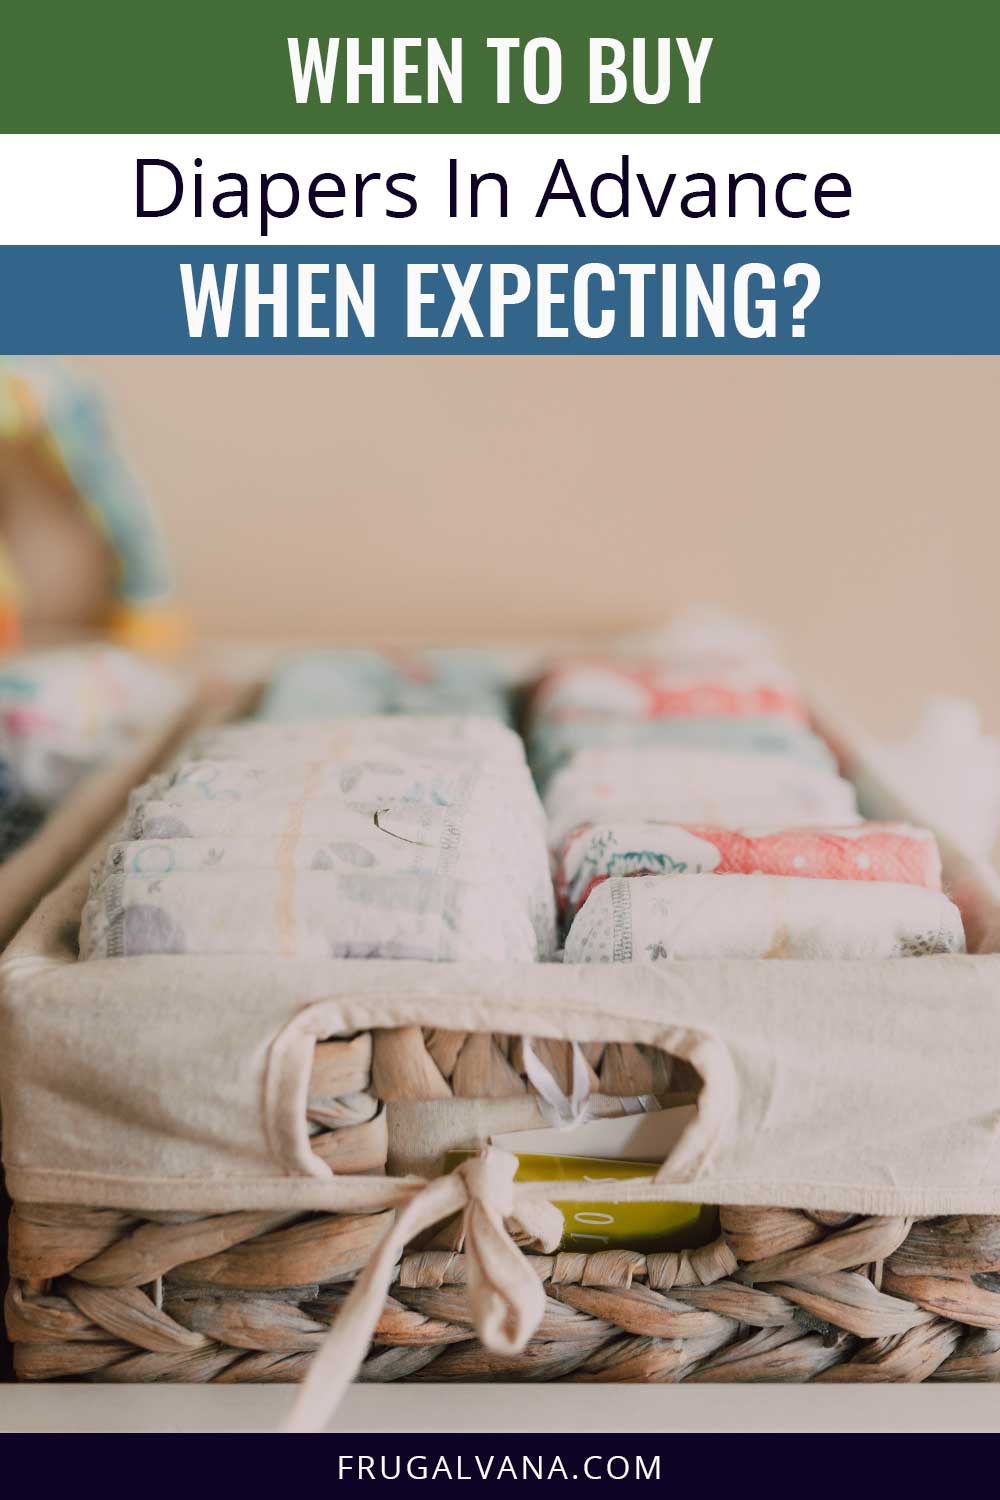 When To Buy Diapers In Advance When Expecting?